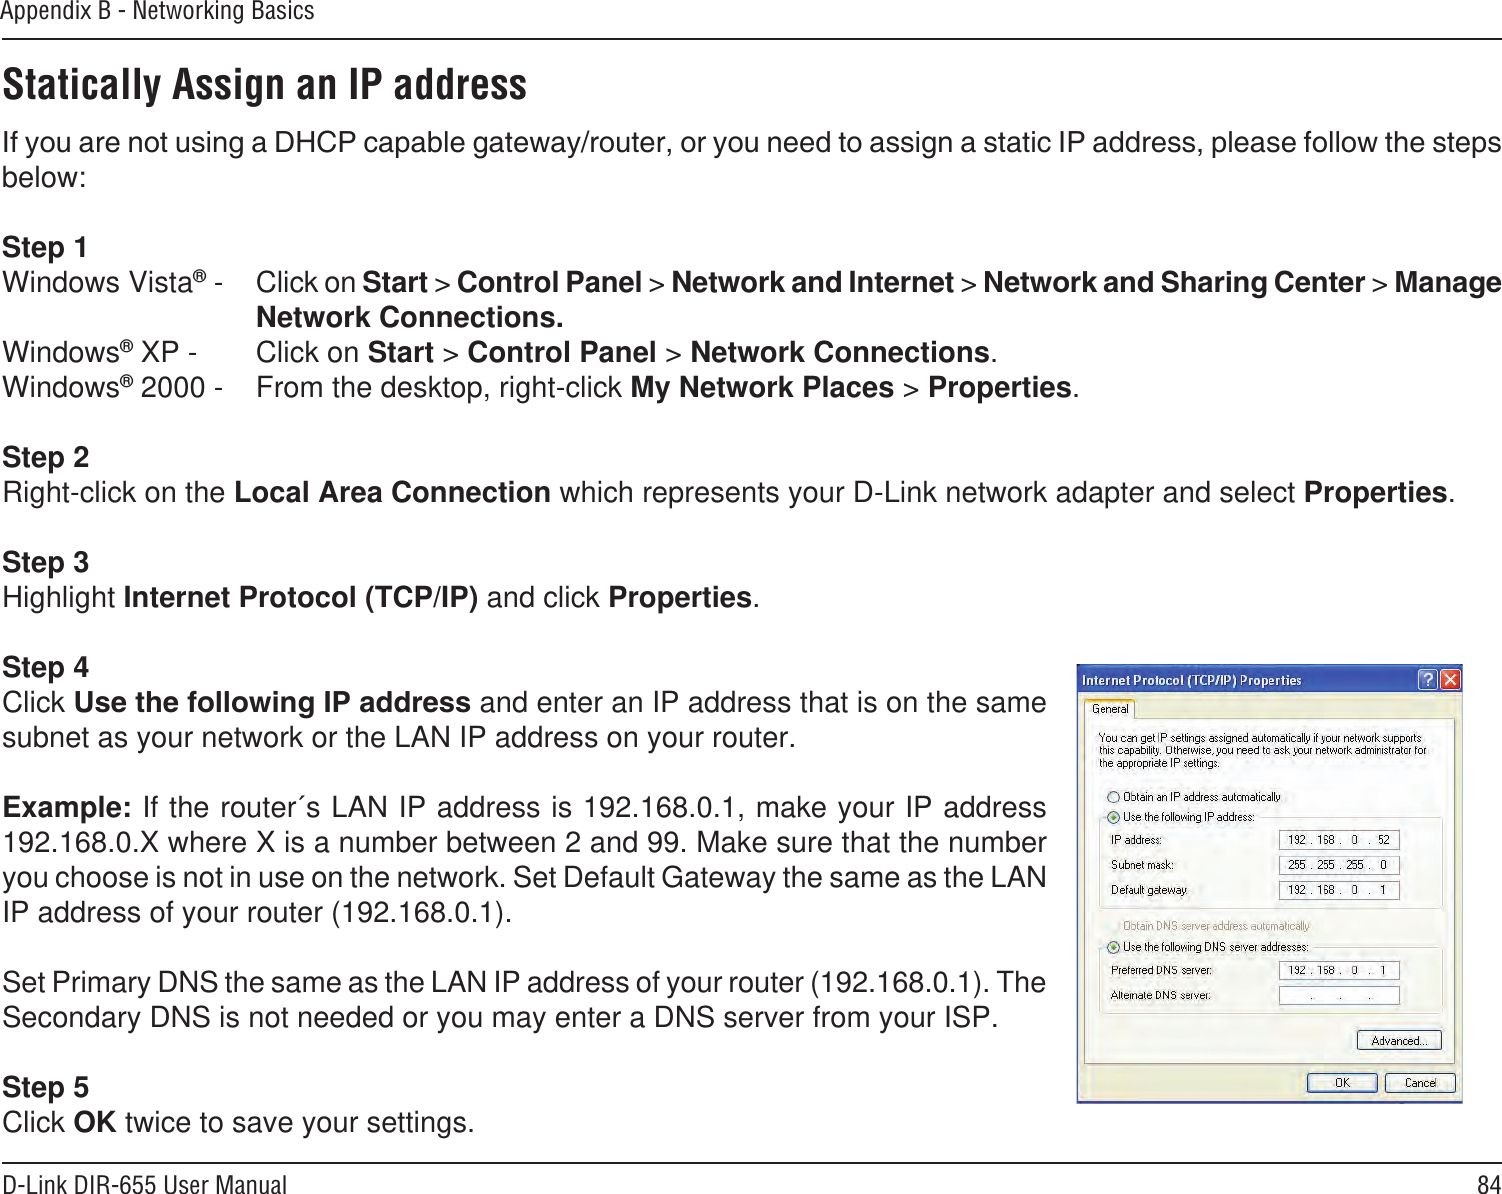 84D-Link DIR-655 User ManualAppendix B - Networking BasicsStatically Assign an IP addressbelow:Step 1Windows Vista® -  Click on Start &gt; Control Panel &gt; Network and Internet &gt;  &gt; Network Connections.Windows® XP -  Click on Start &gt; Control Panel &gt; Network Connections.Windows® 2000 -  From the desktop, right-click My Network Places &gt; Properties.Step 2Right-click on the Local Area Connection which represents your D-Link network adapter and select Properties.Step 3Highlight Internet Protocol (TCP/IP) and click Properties.Step 4Click  and enter an IP address that is on the same subnet as your network or the LAN IP address on your router. Example: If the router´s LAN IP address is 192.168.0.1, make your IP address 192.168.0.X where X is a number between 2 and 99. Make sure that the number you choose is not in use on the network. Set Default Gateway the same as the LAN IP address of your router (192.168.0.1). Set Primary DNS the same as the LAN IP address of your router (192.168.0.1). The Secondary DNS is not needed or you may enter a DNS server from your ISP.Step 5Click OK twice to save your settings.